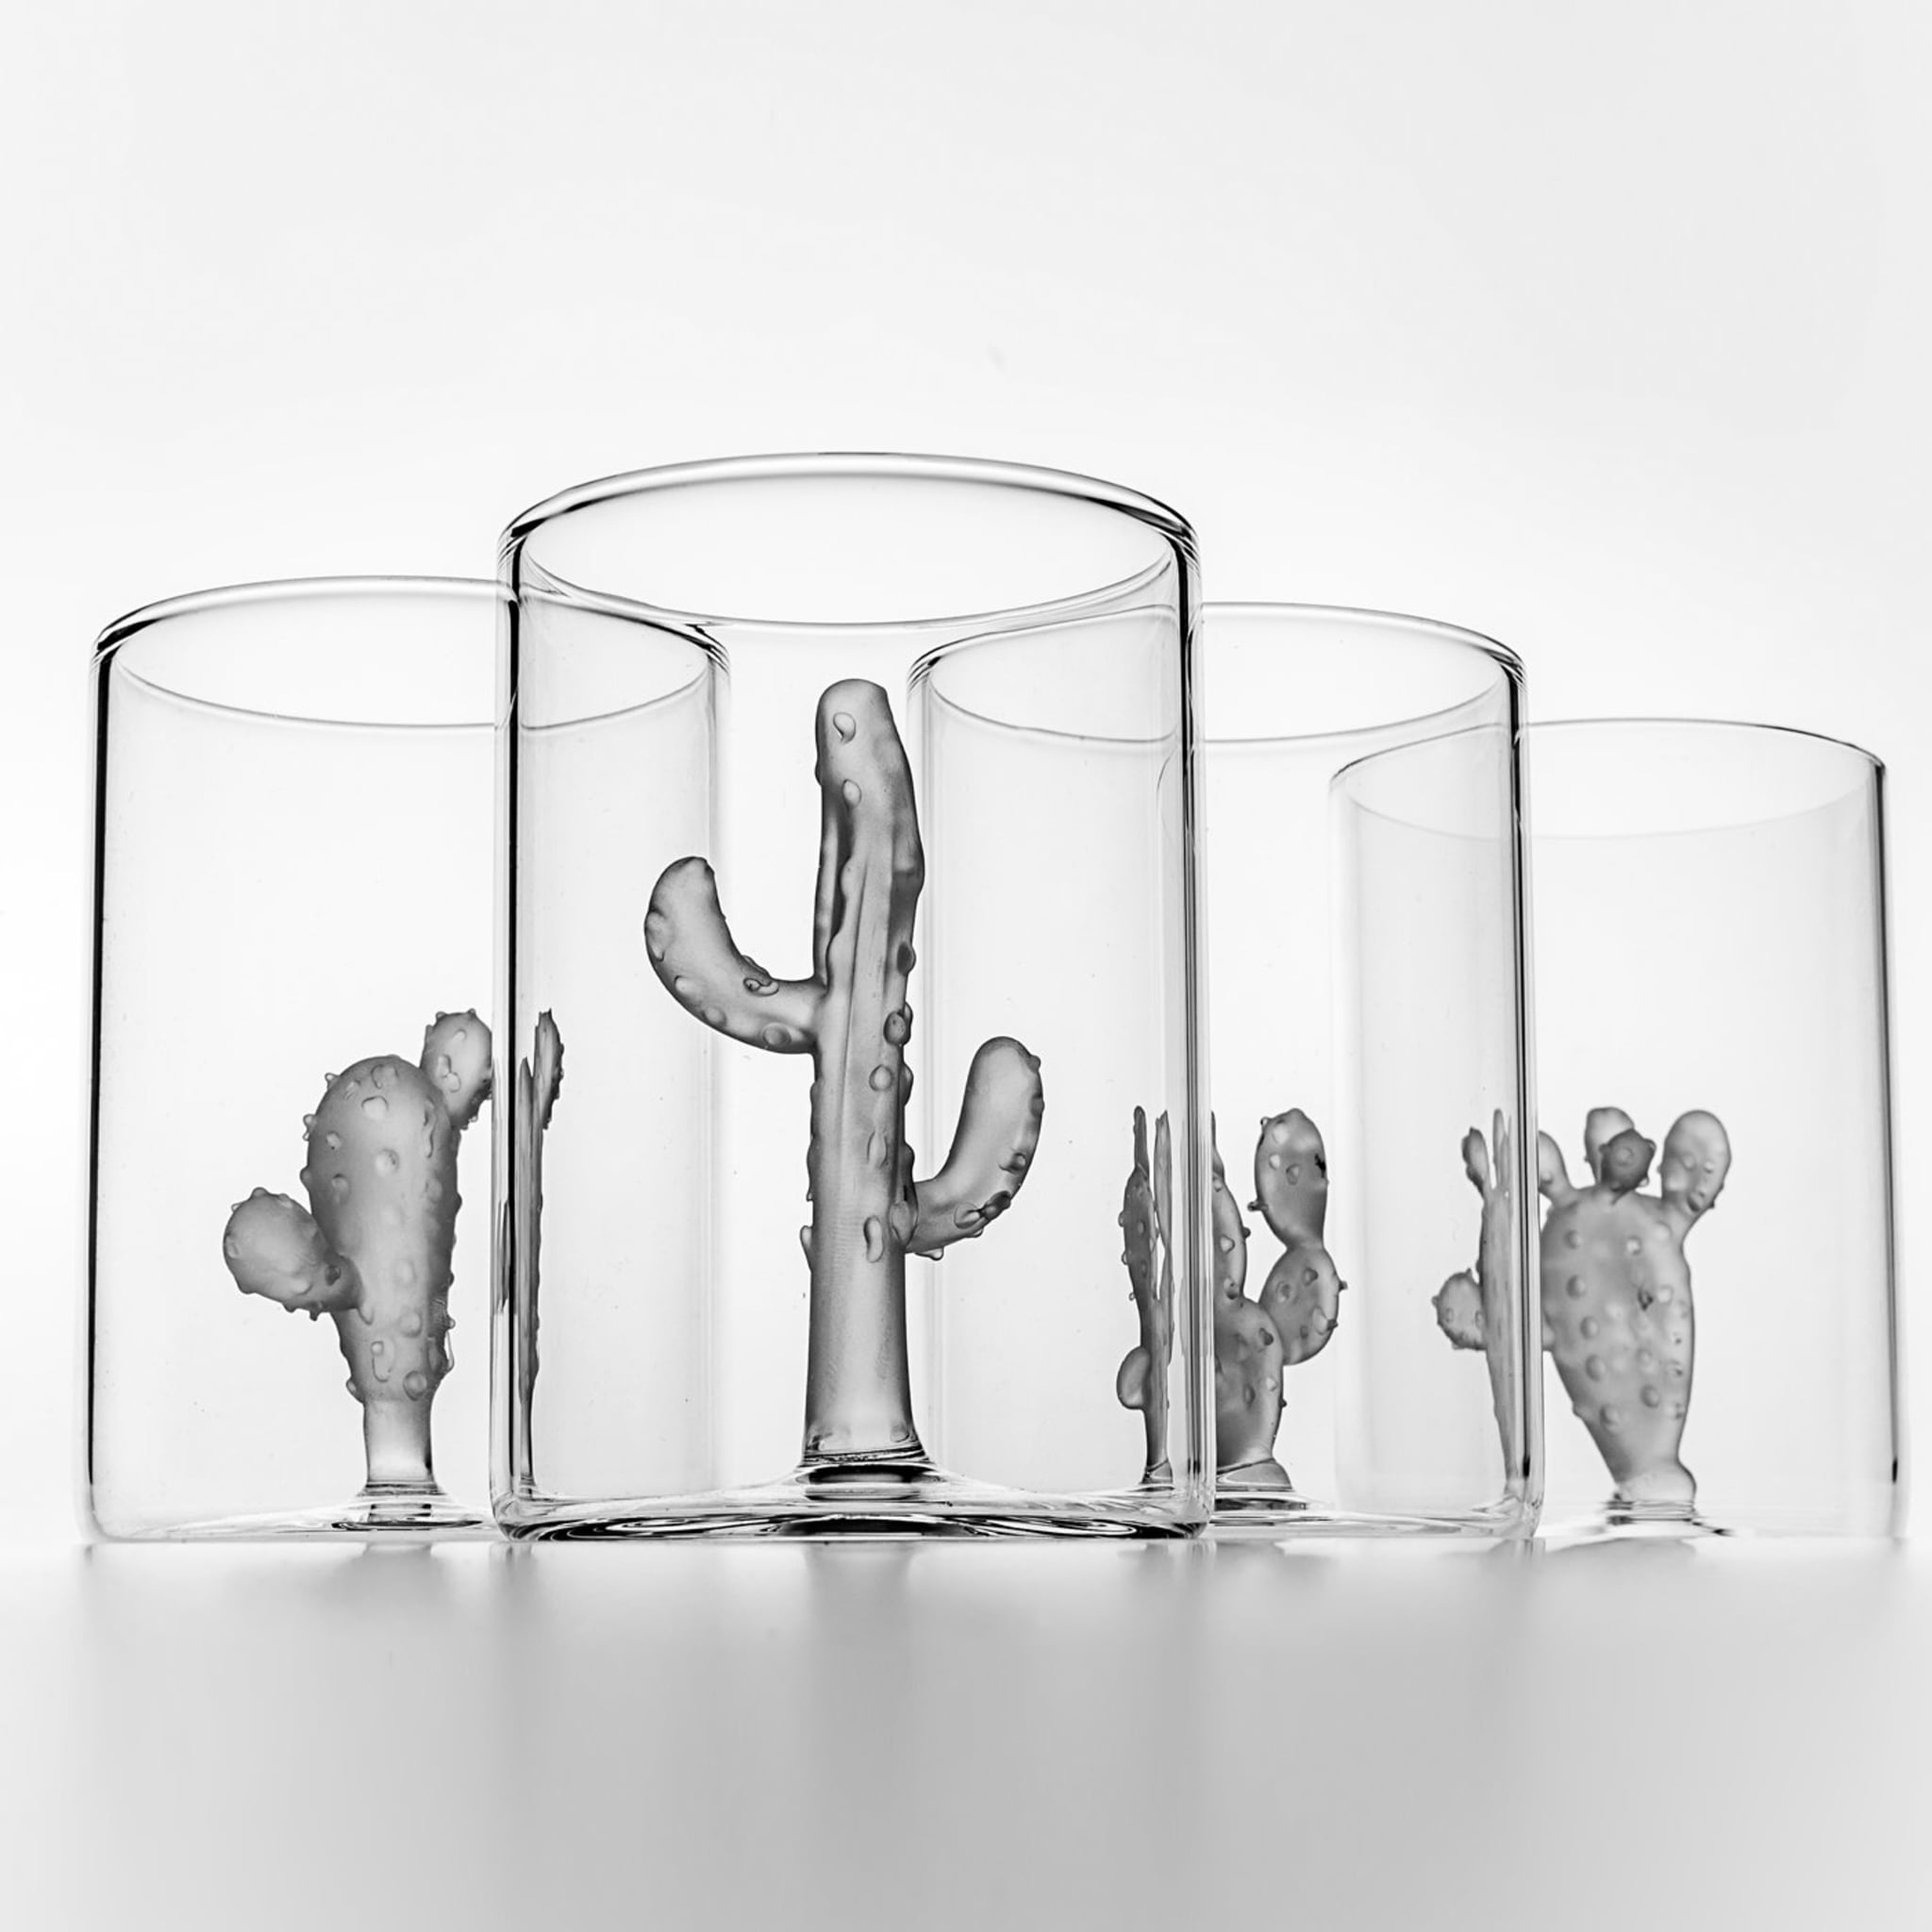 Set of 4 Glasses and 1 Jug Cactus Collection - Alternative view 1